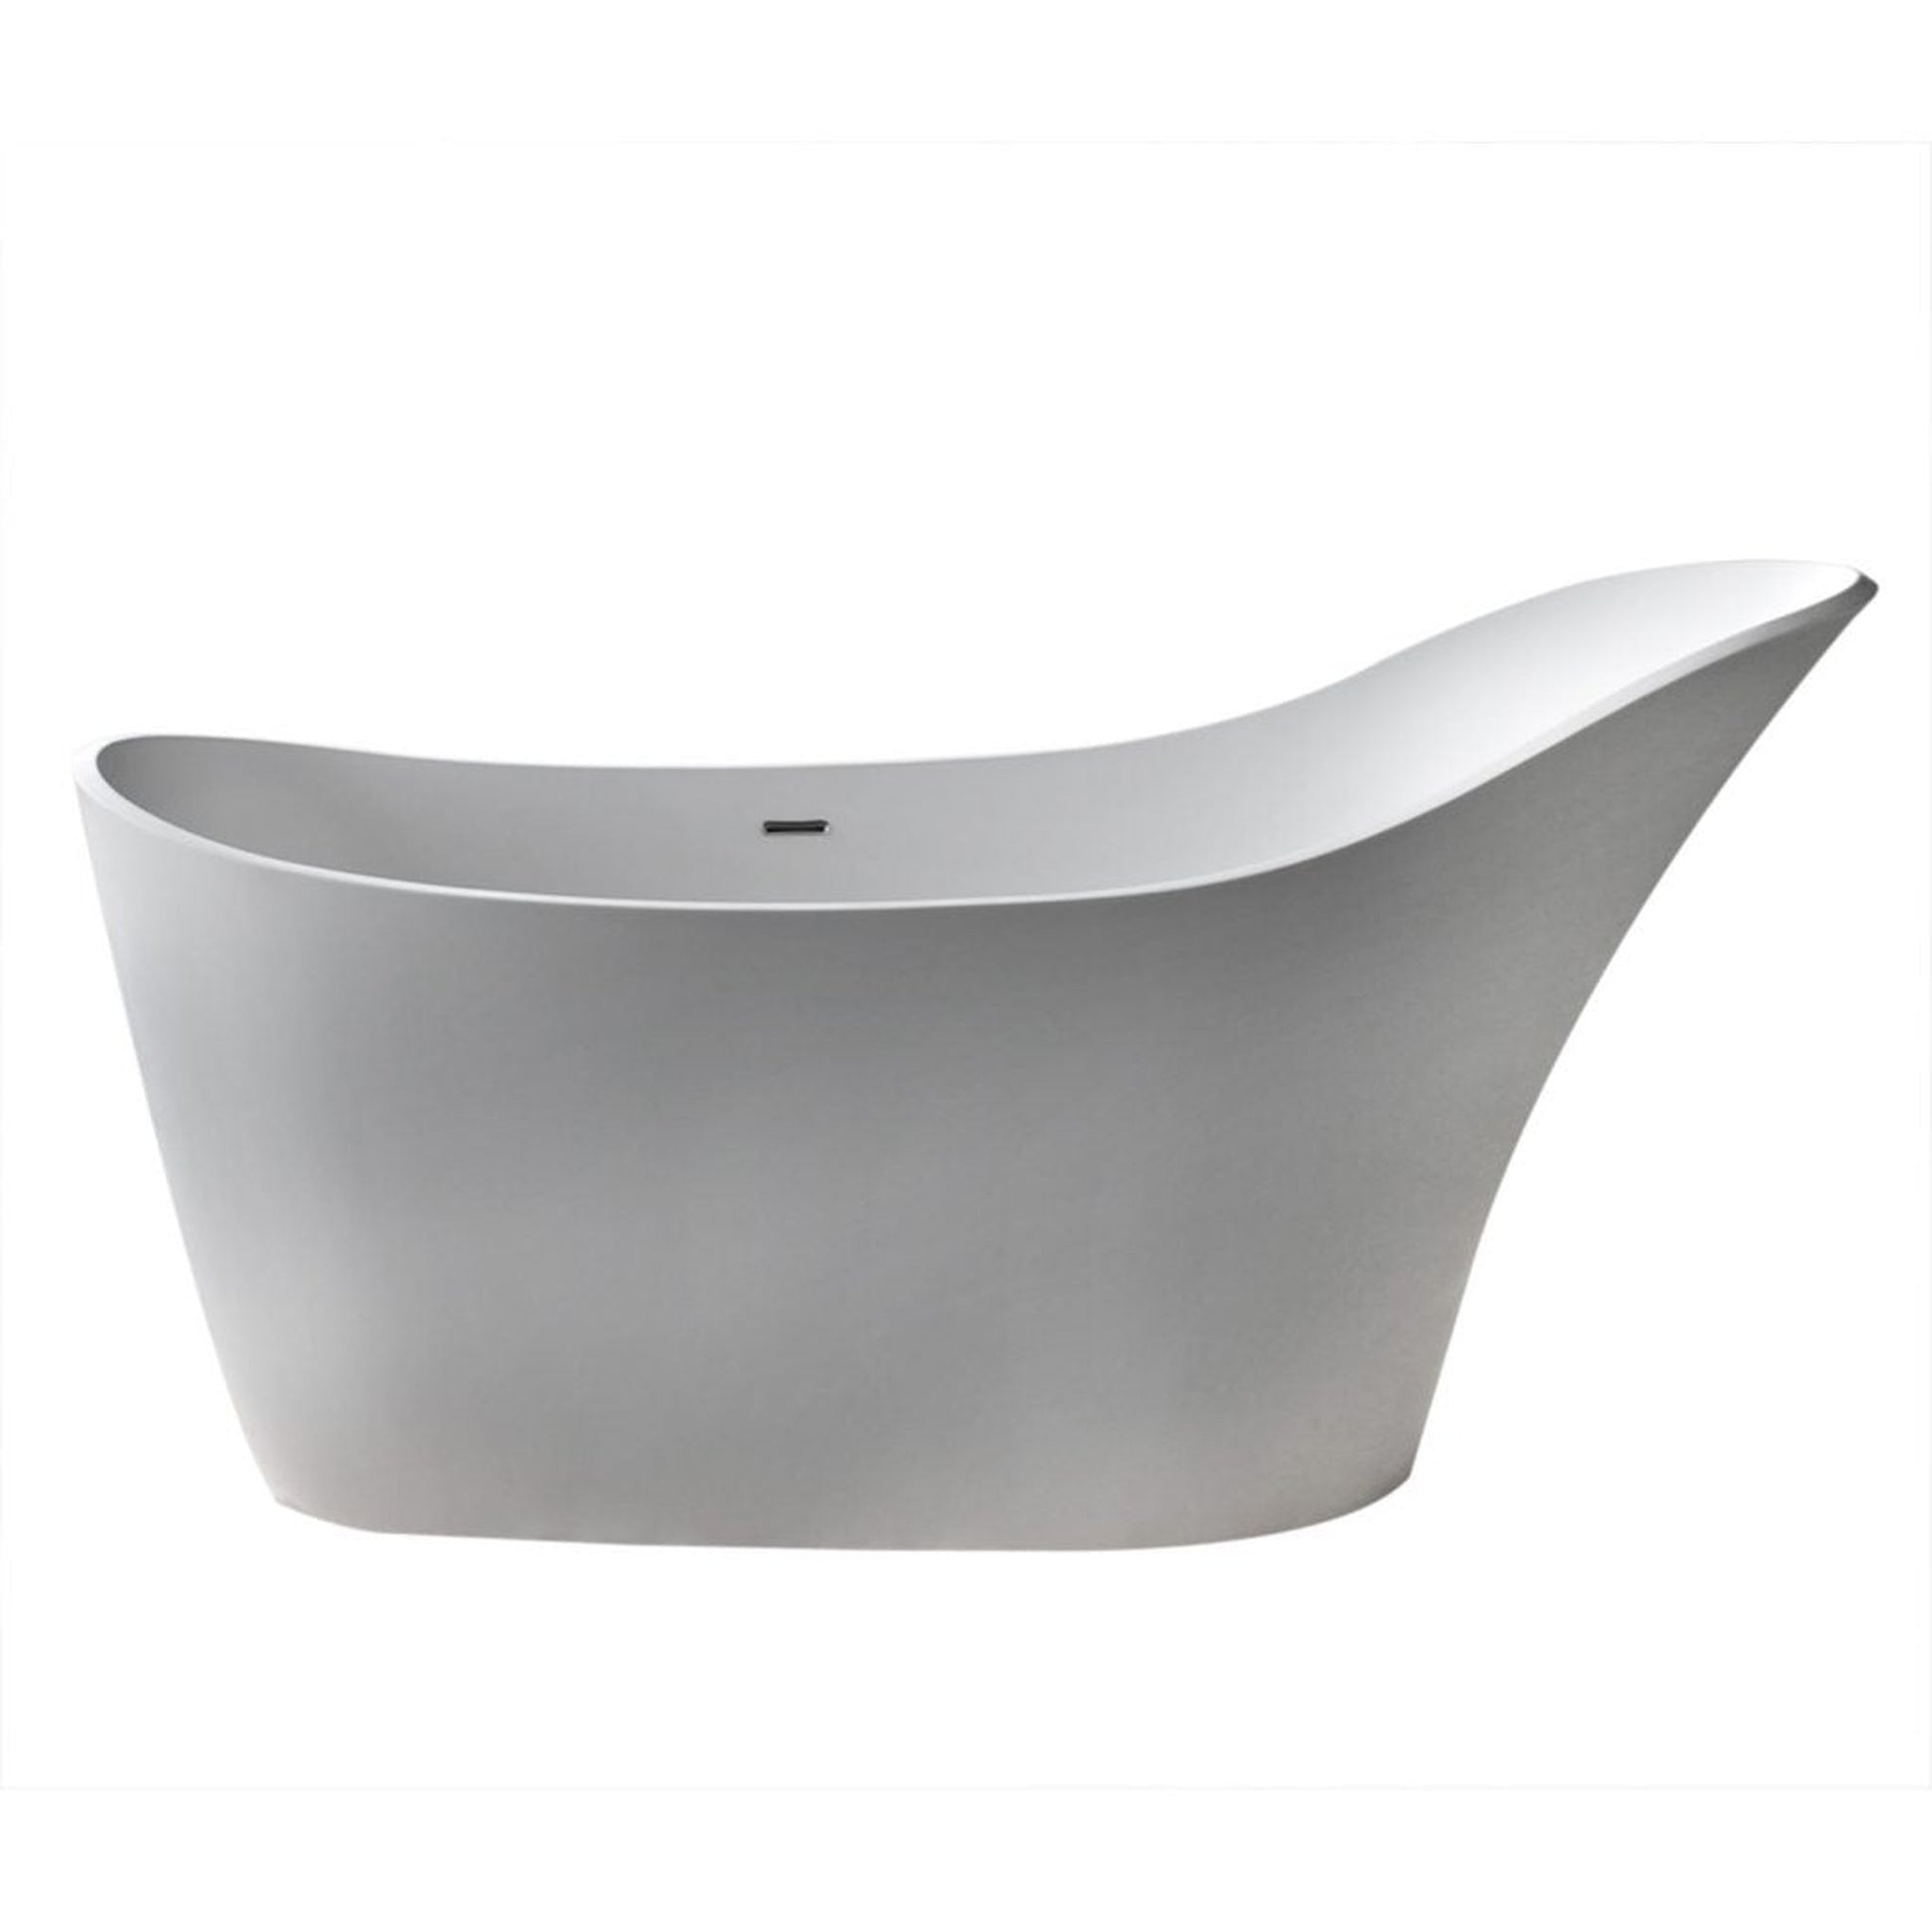 ANZZI Tuasavi Series 68" x 29" Matte White Freestanding Bathtub With Built-In Overflow and Pop-Up Drain